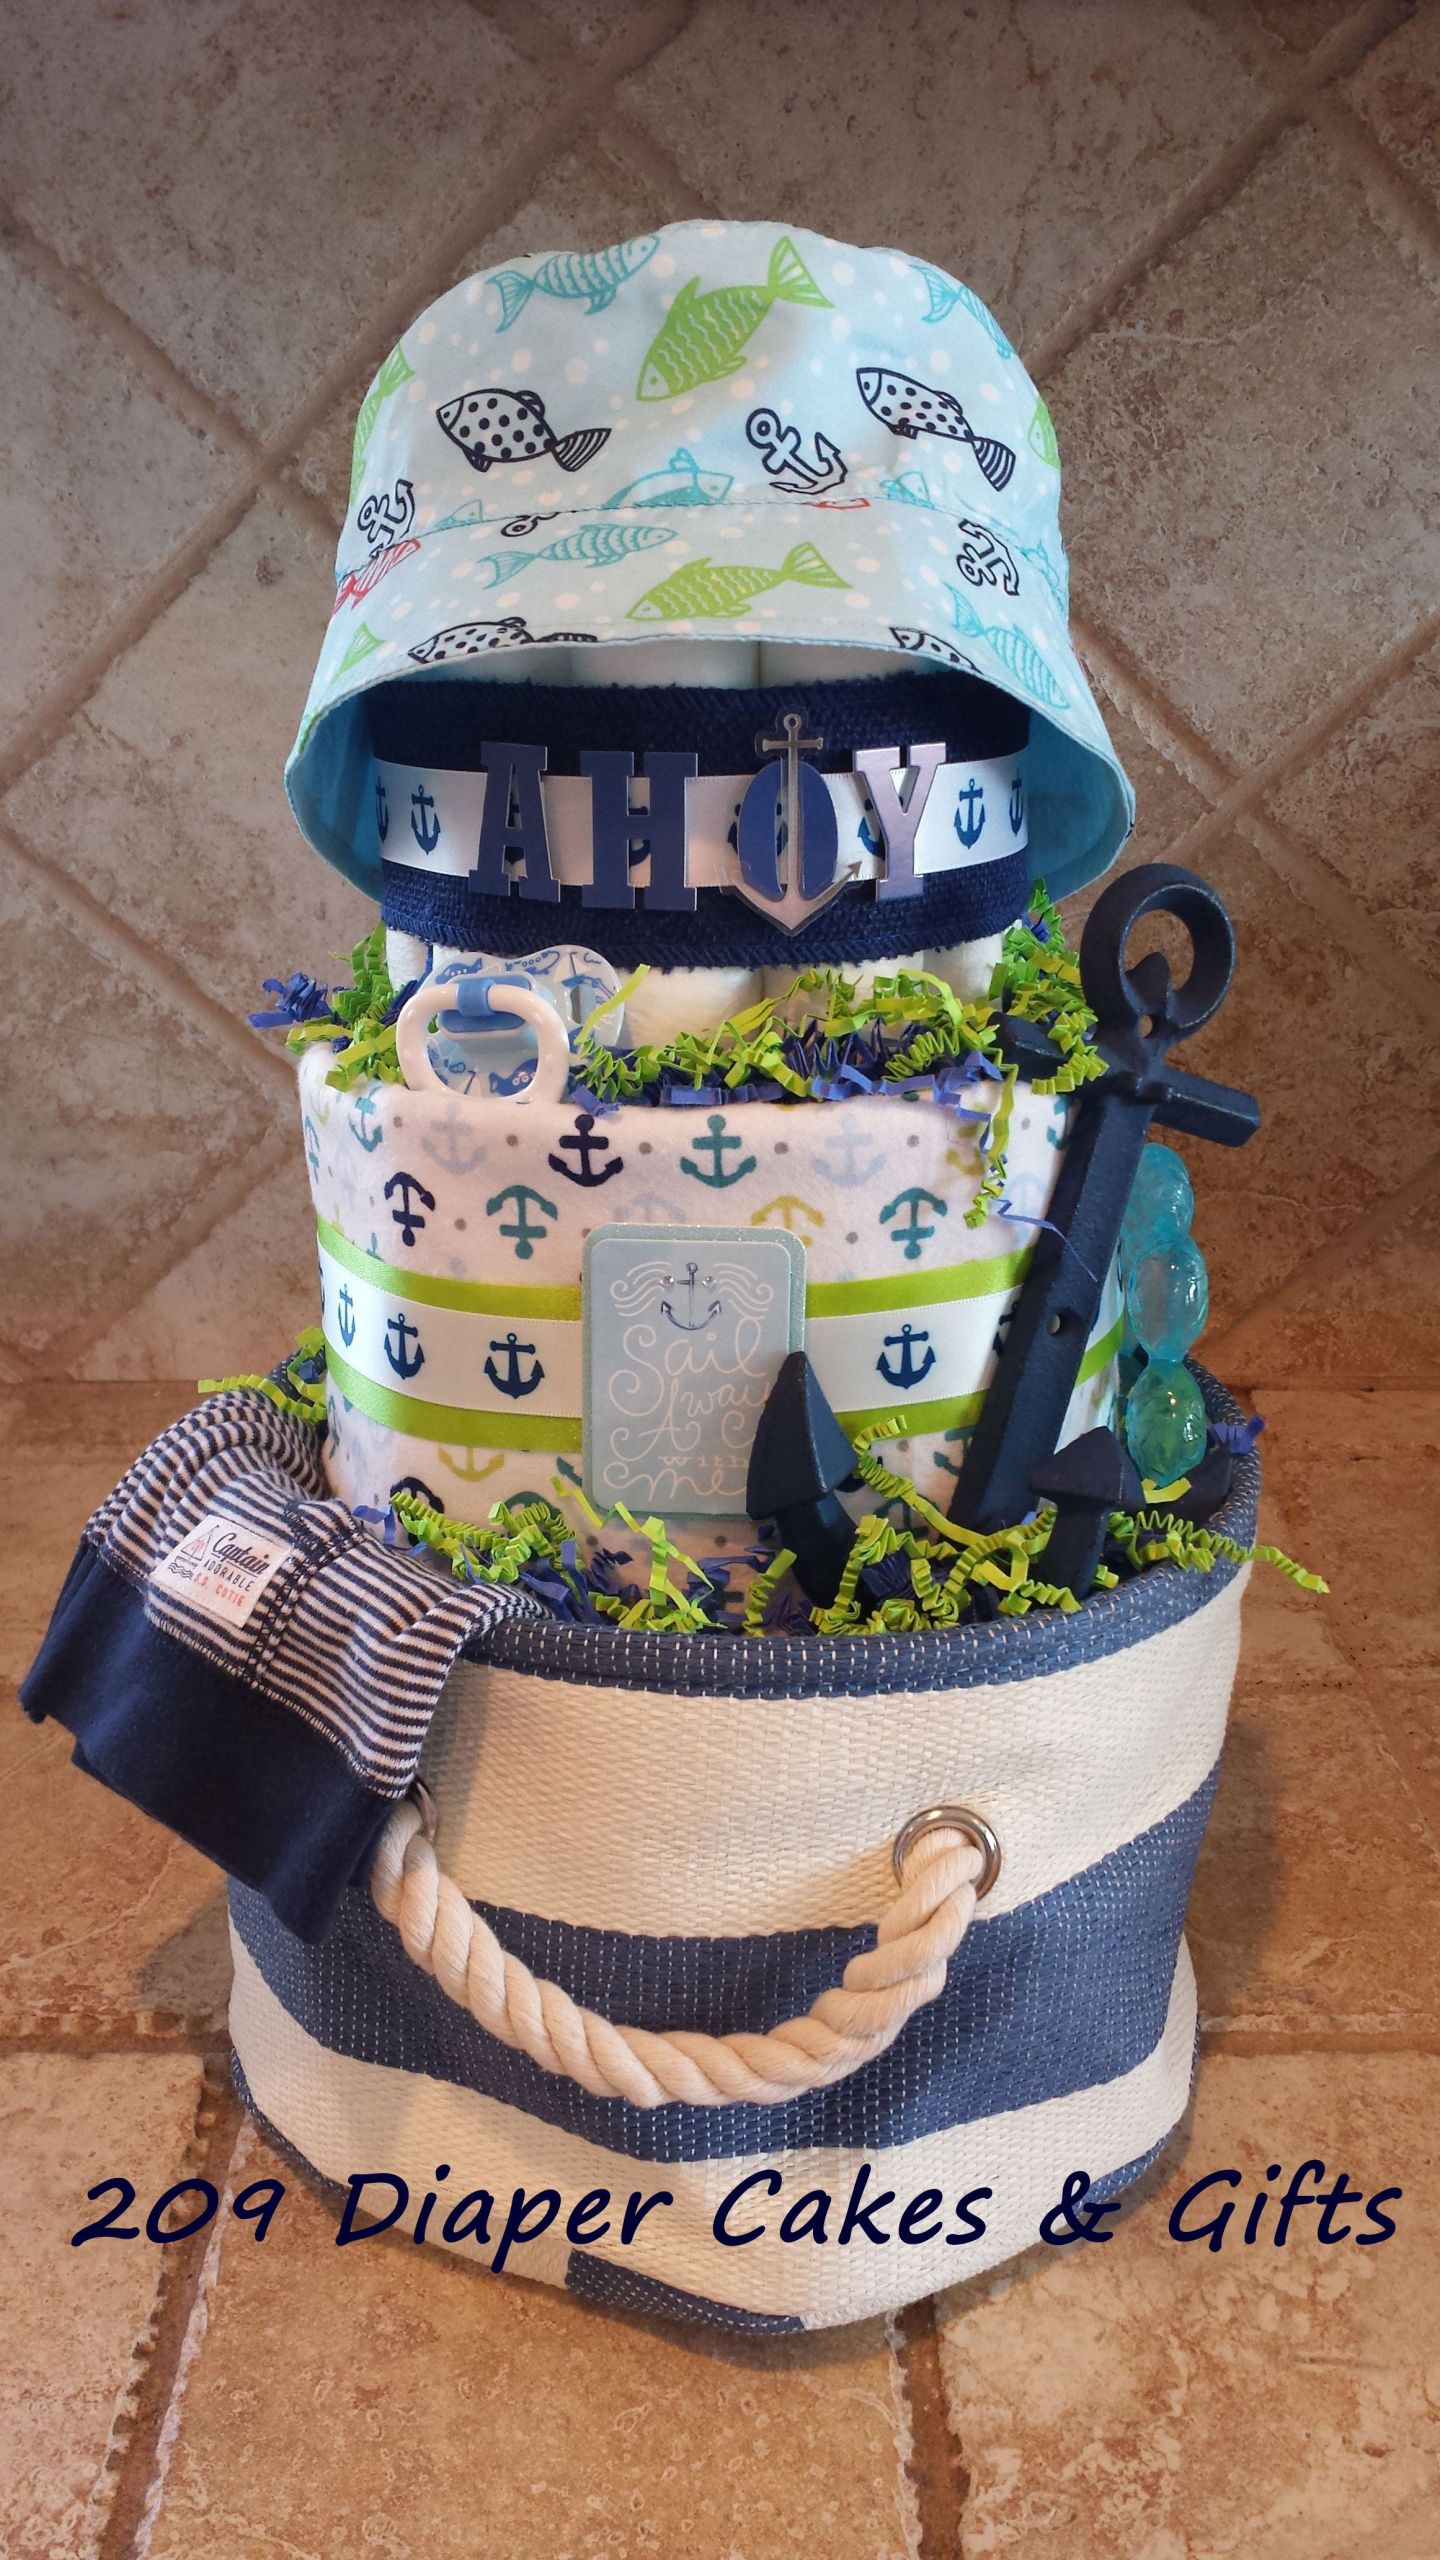 Nautical Baby Shower Gifts
 Nautical Anchor Diaper Cake for Baby Boy by 209 Diaper